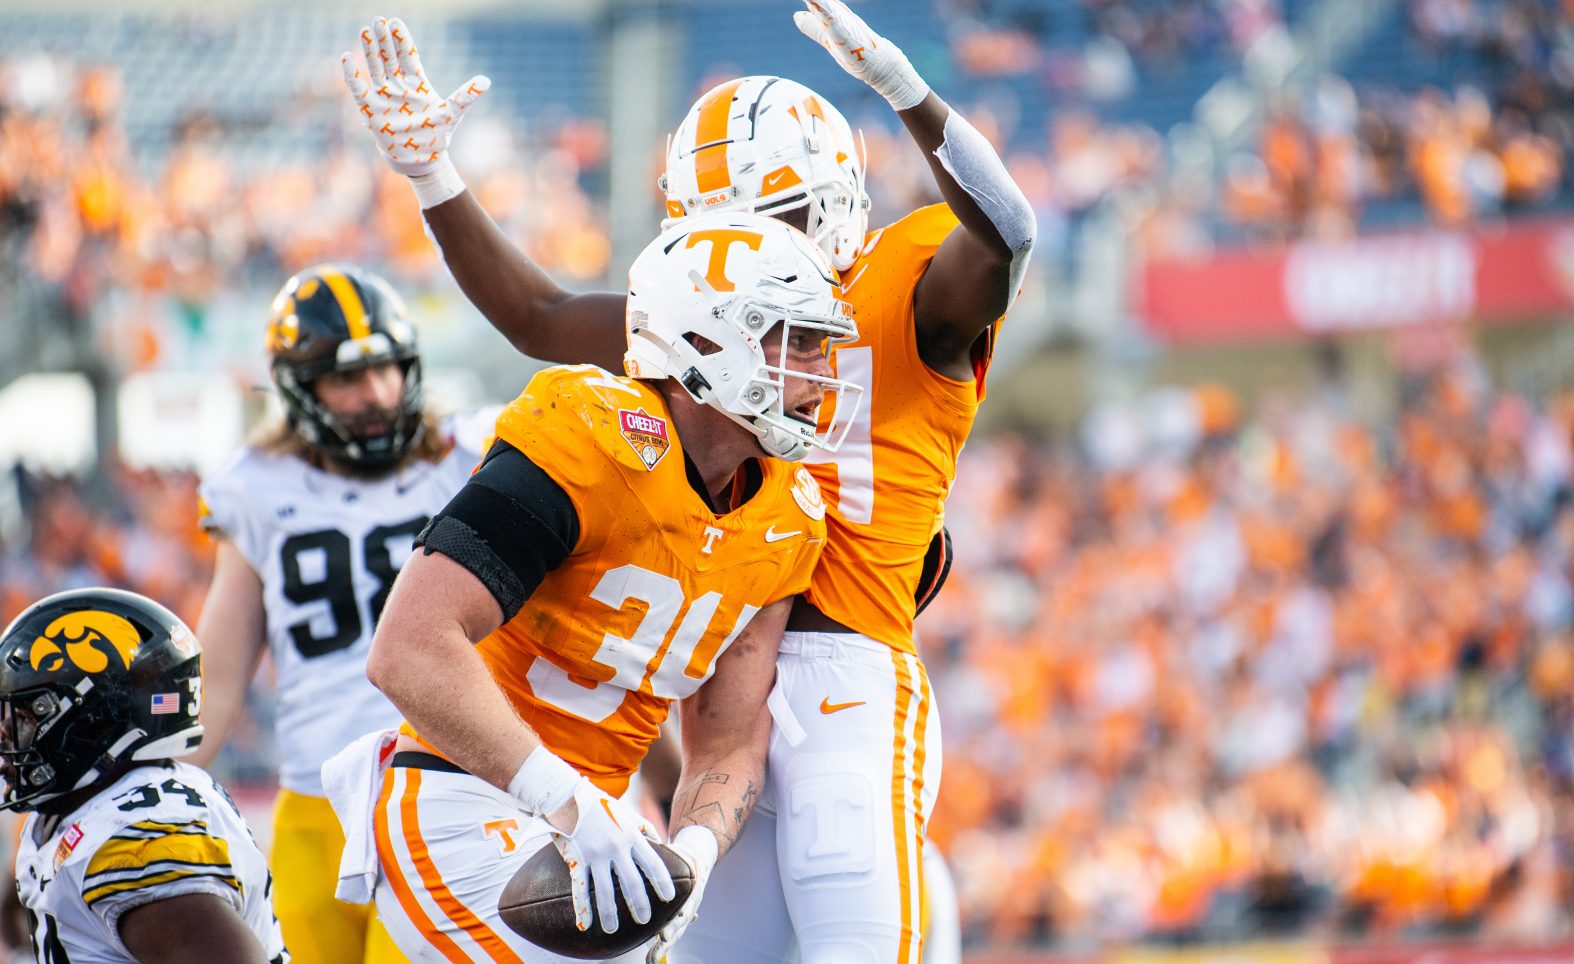 Miller & Williams: Iowa trounced by Vols in bowl game